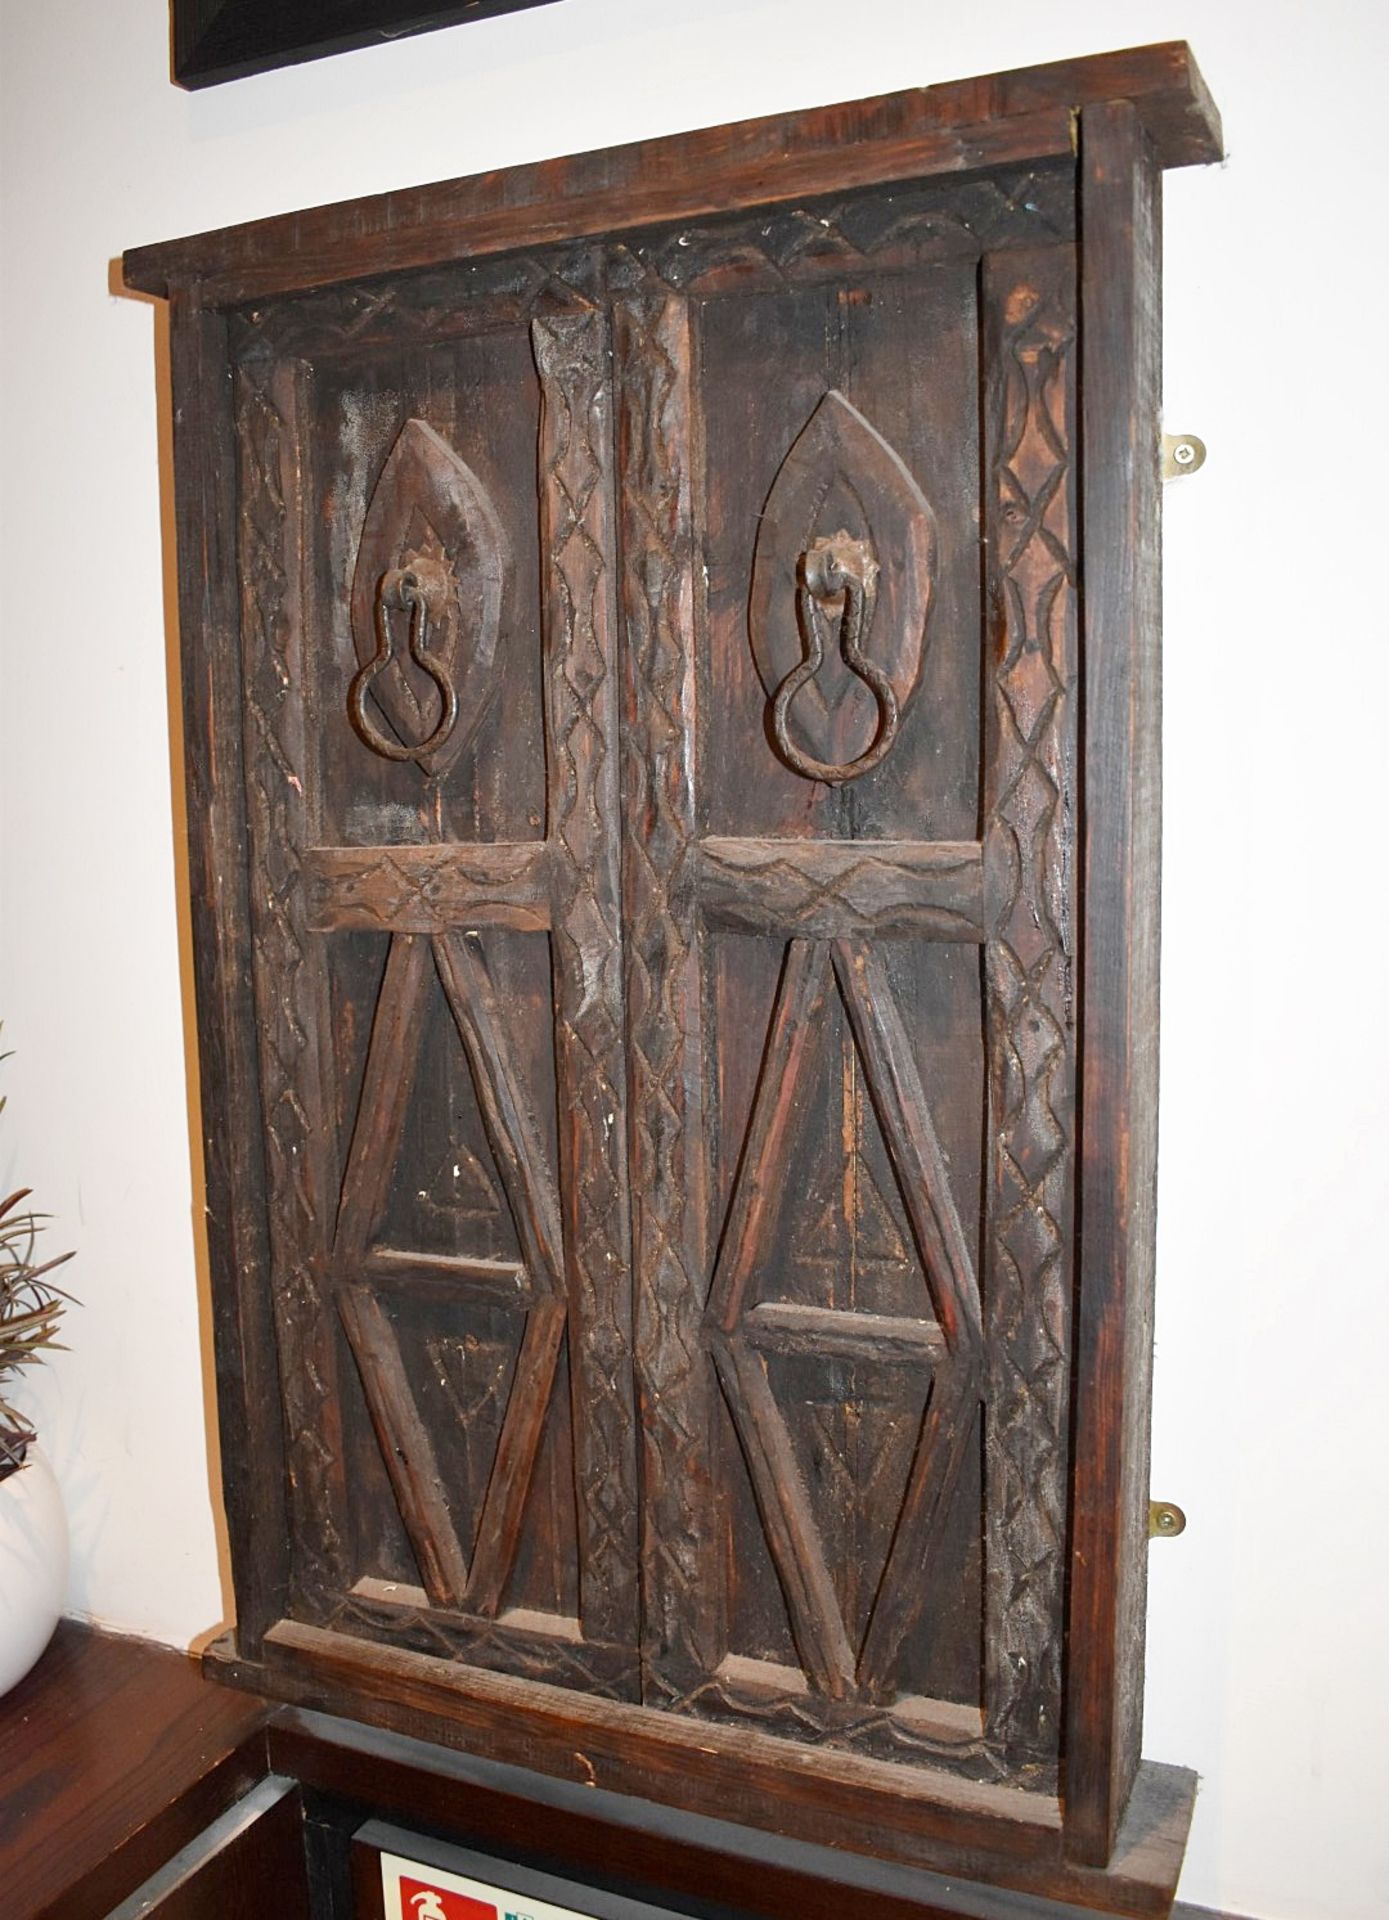 1 x Pair Of Ornate Wooden Wall-mounted Hand-Carved Rustic Pantry Doors - Image 2 of 2